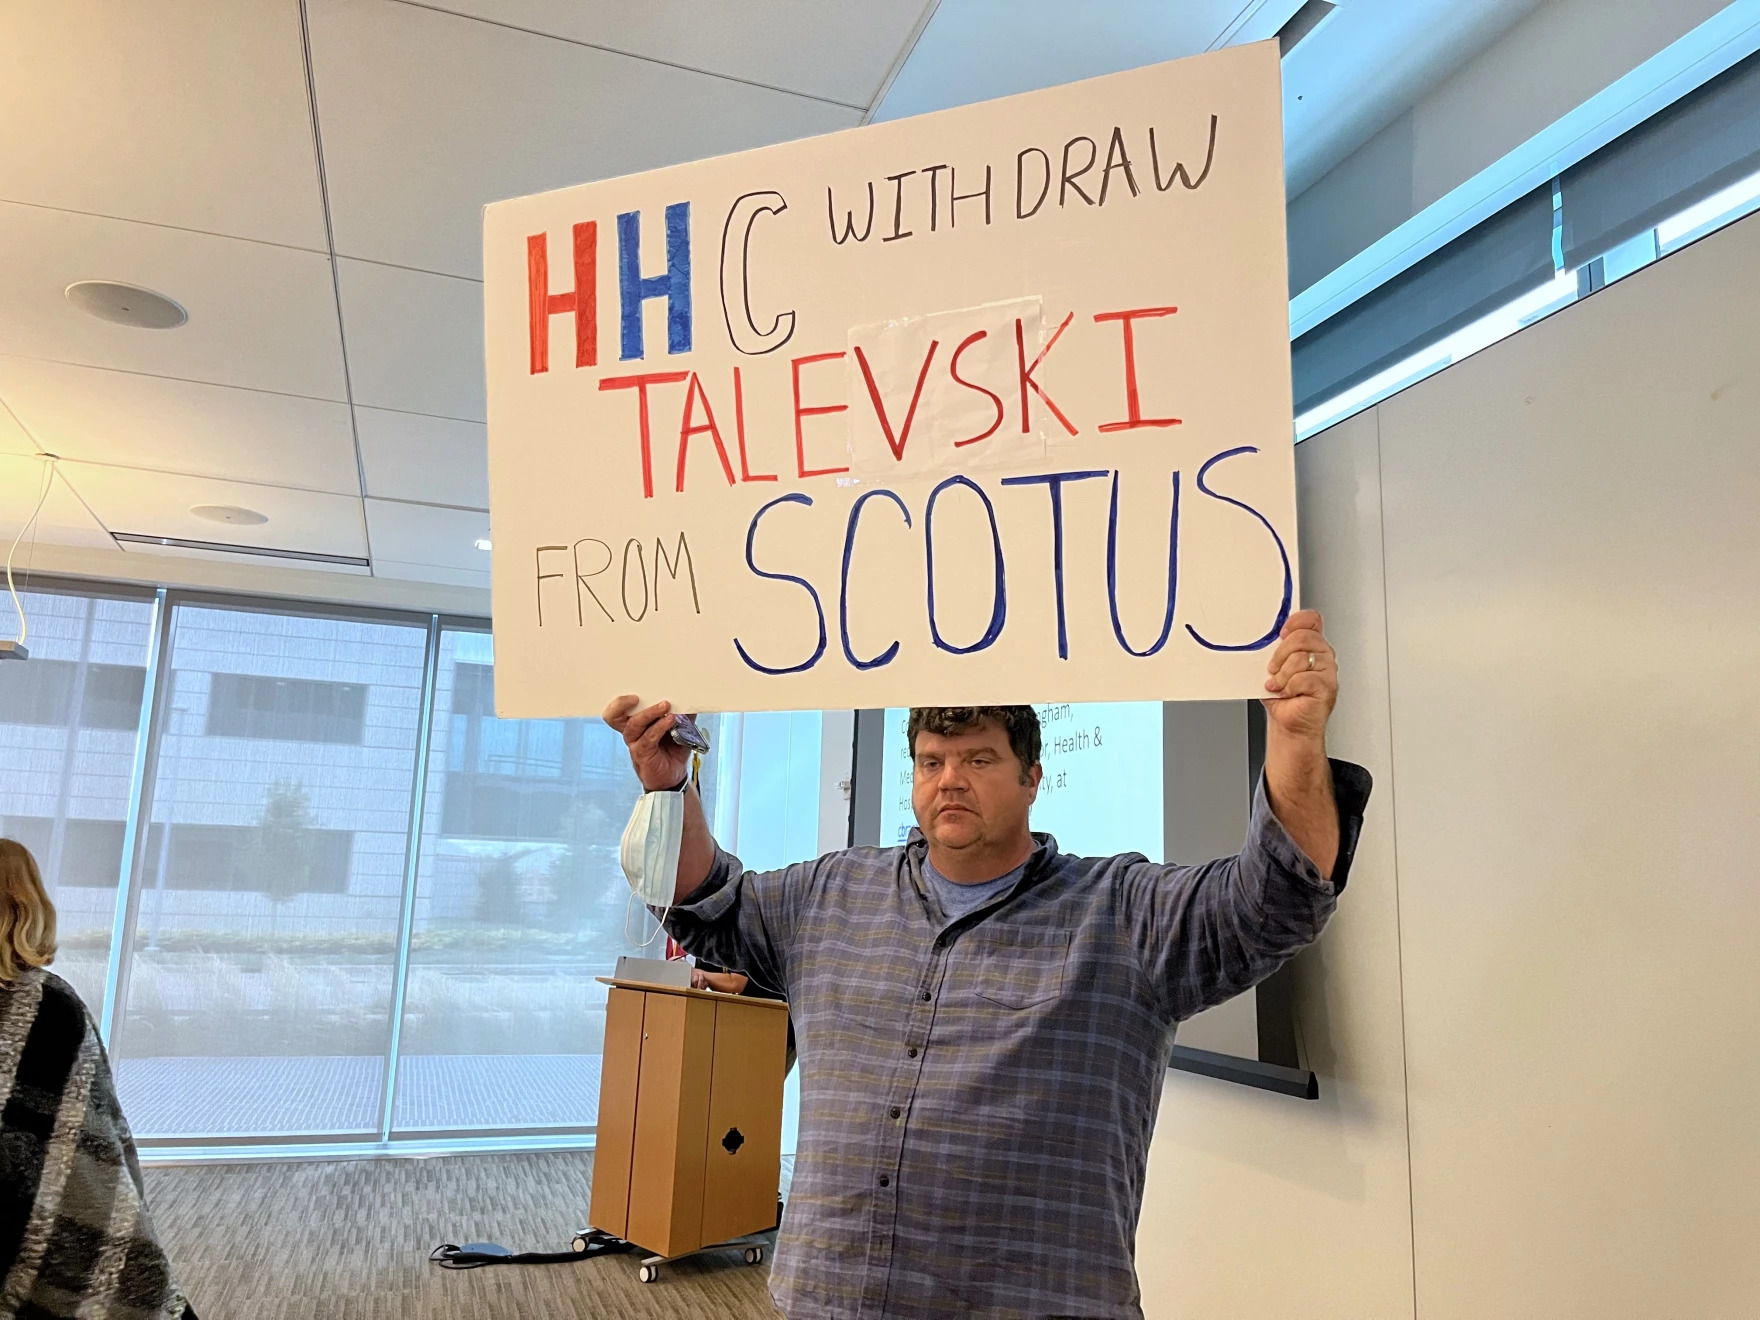 A photo shows a man indoors holding up a sign that reads, "HHC withdraw Talevski from SCOTUS."